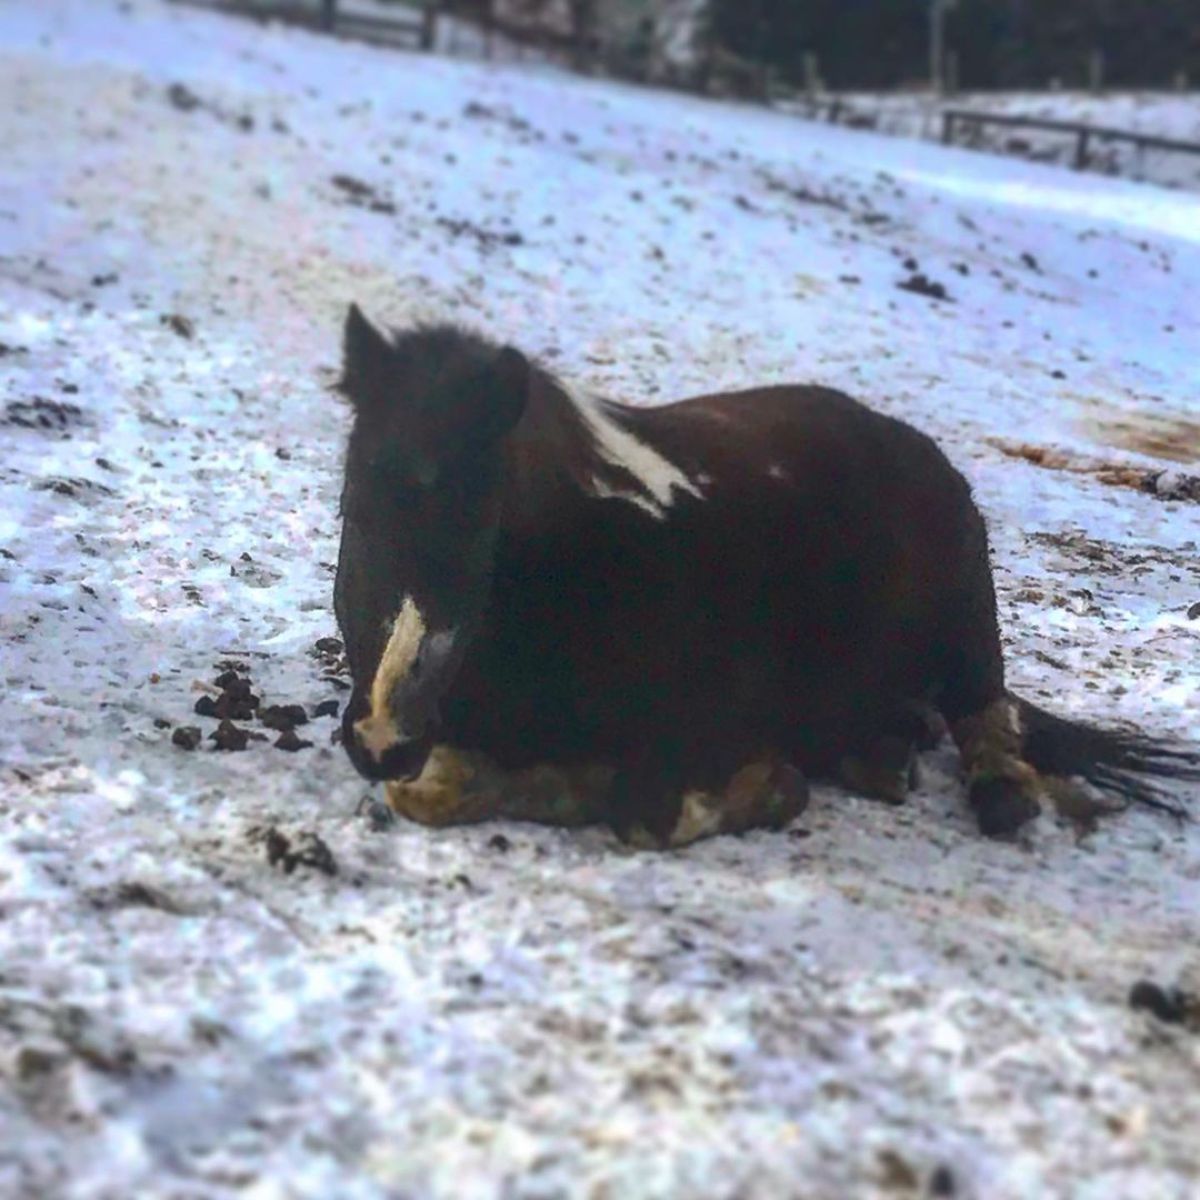 A brown horse sleeps on the snow-covered ground.